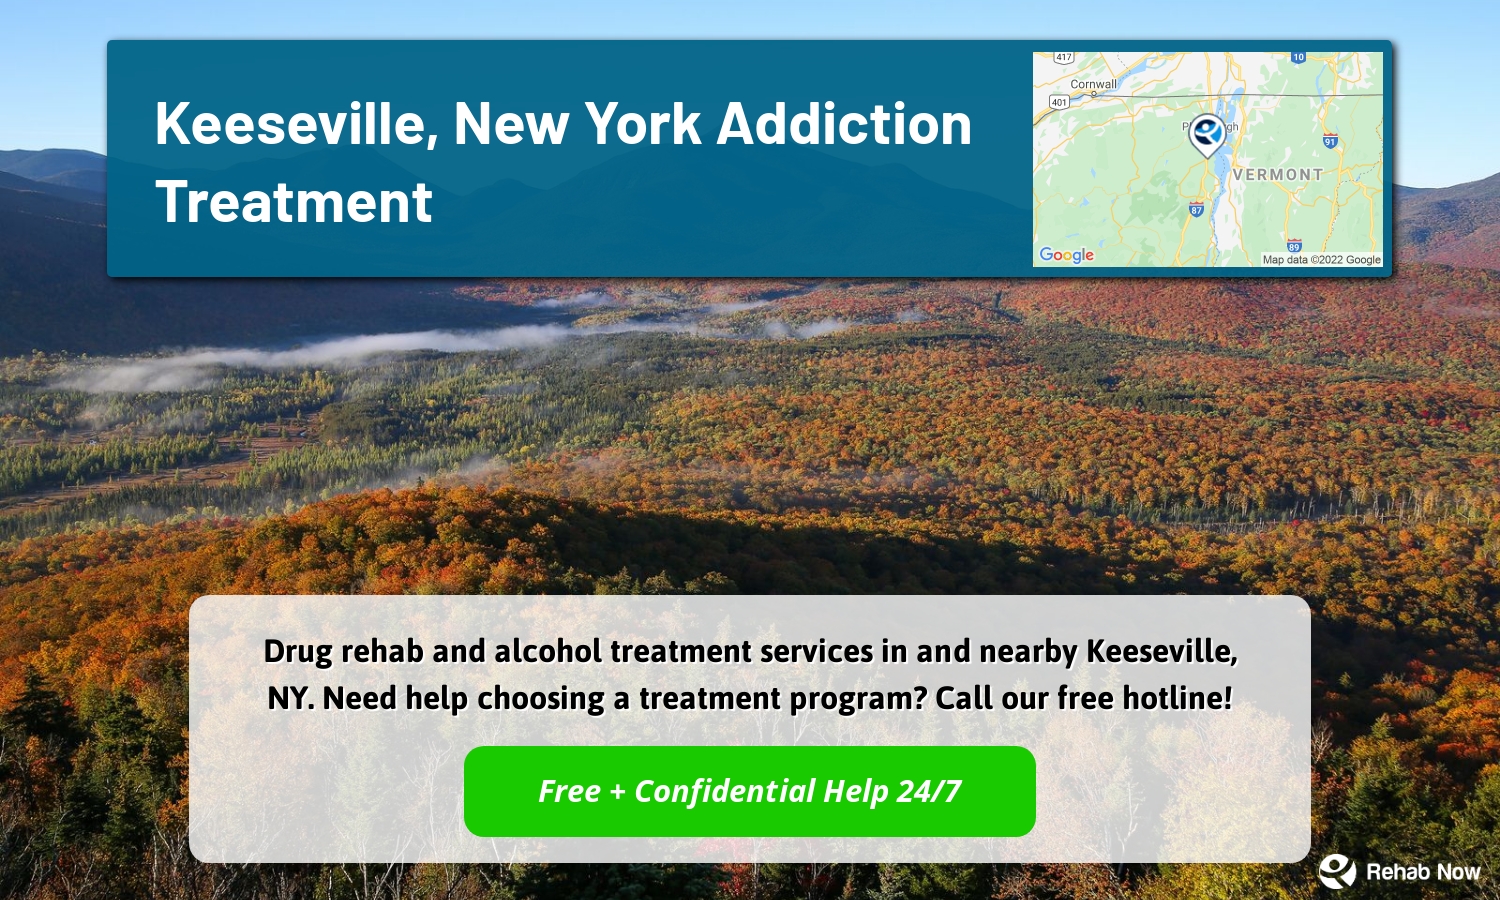 Drug rehab and alcohol treatment services in and nearby Keeseville, NY. Need help choosing a treatment program? Call our free hotline!